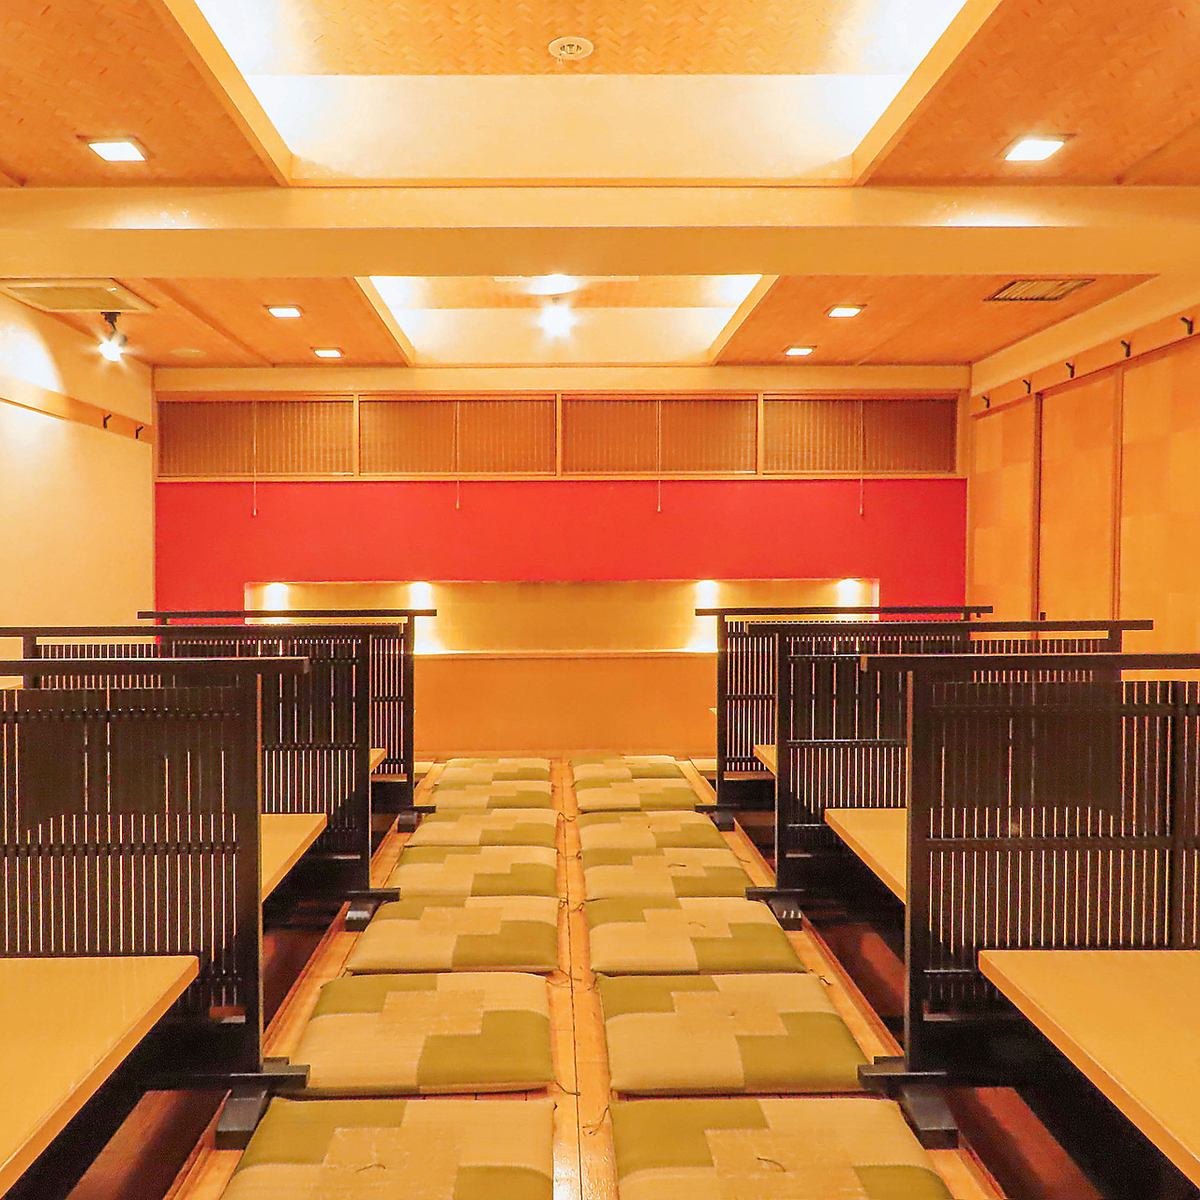 A semi-private room with sunken kotatsu seats can be reserved for 20 to 30 people.